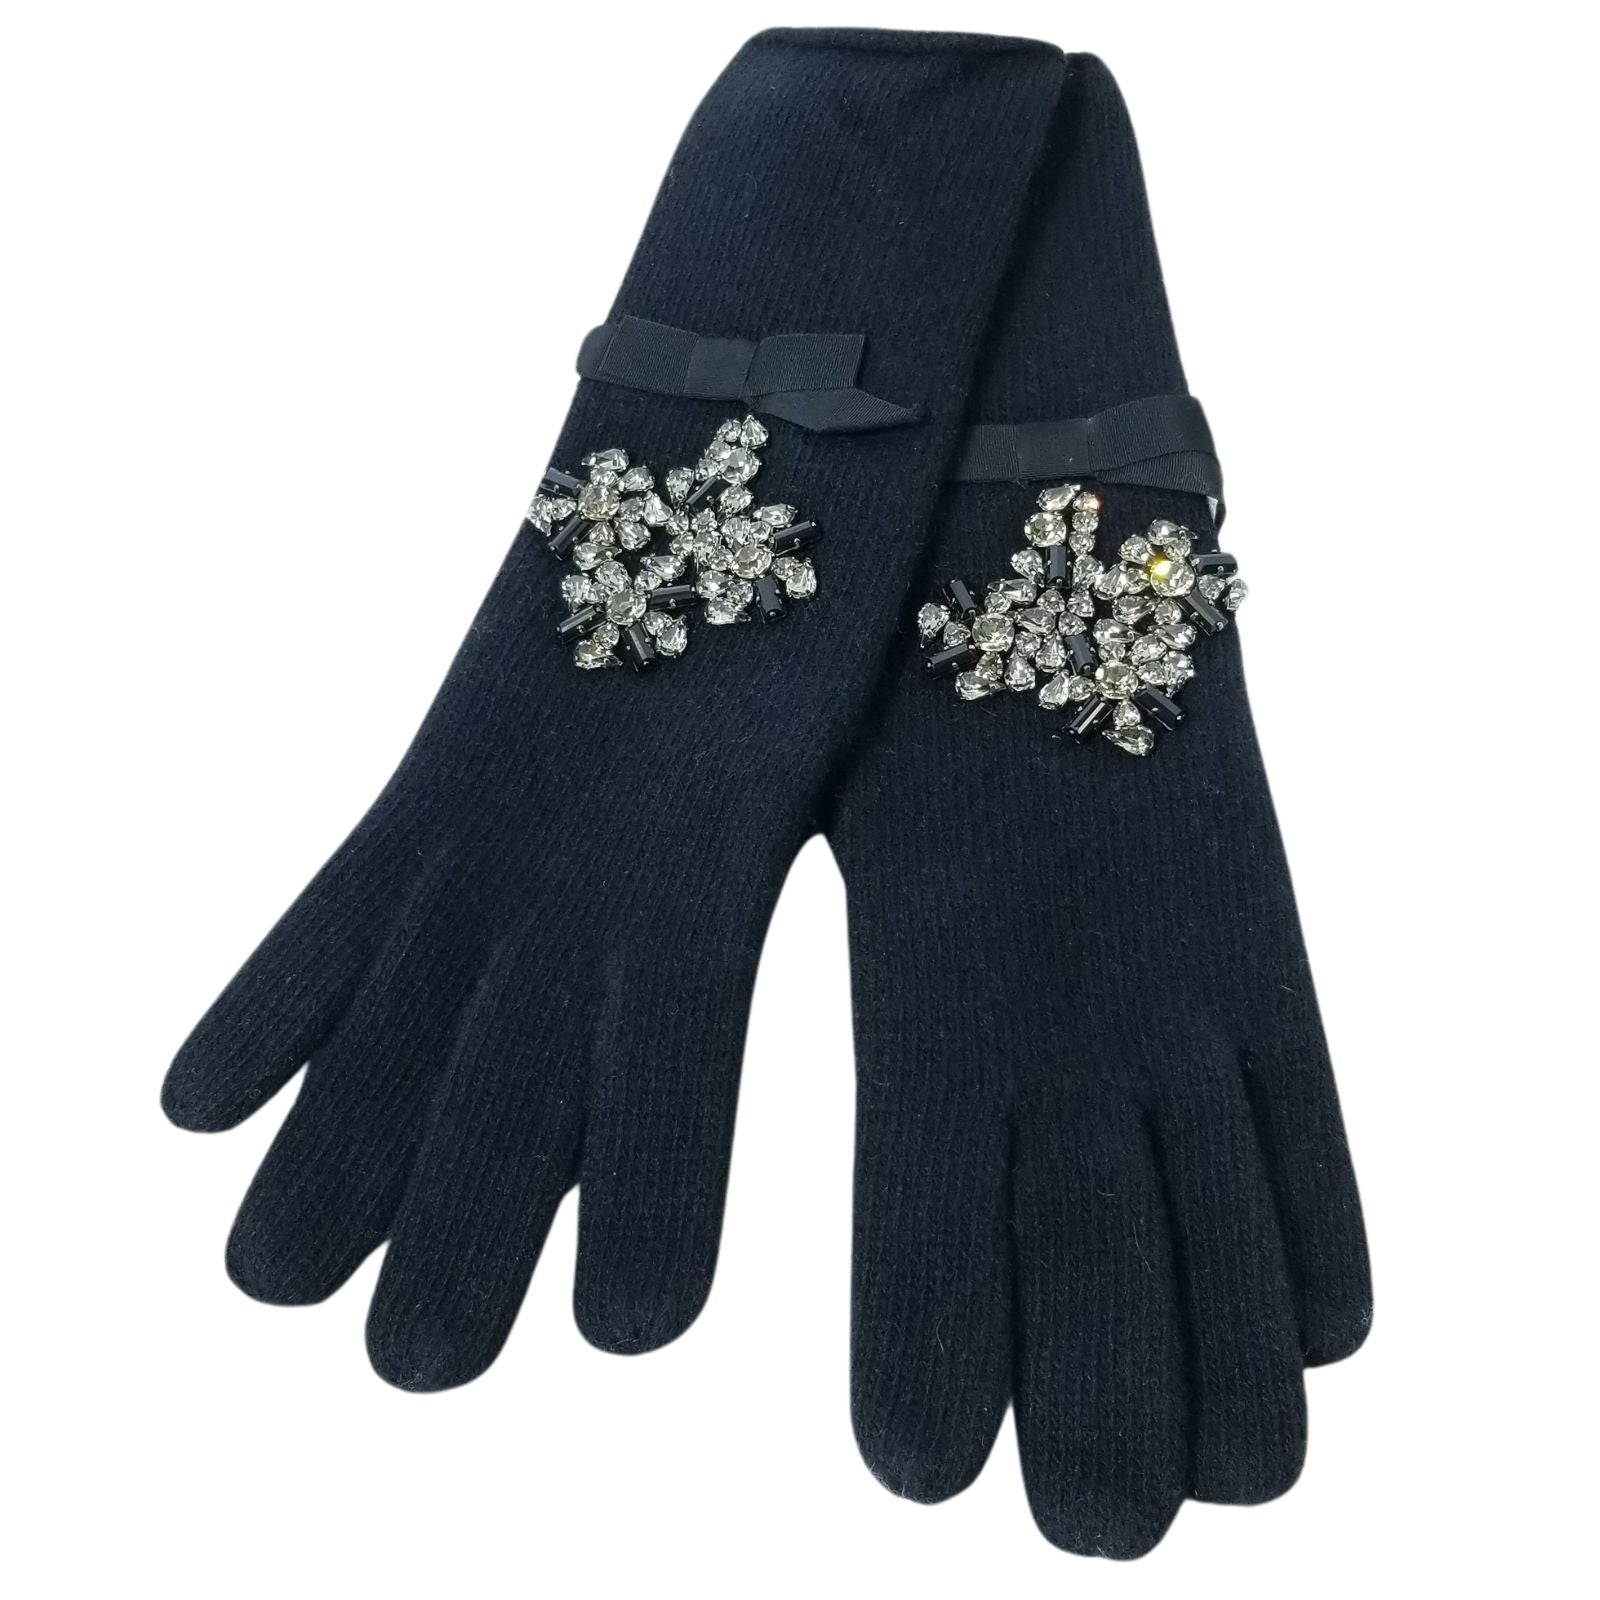 Cashmere glove 13 " with Crystal  Black/Clear and Onyx Chrystals